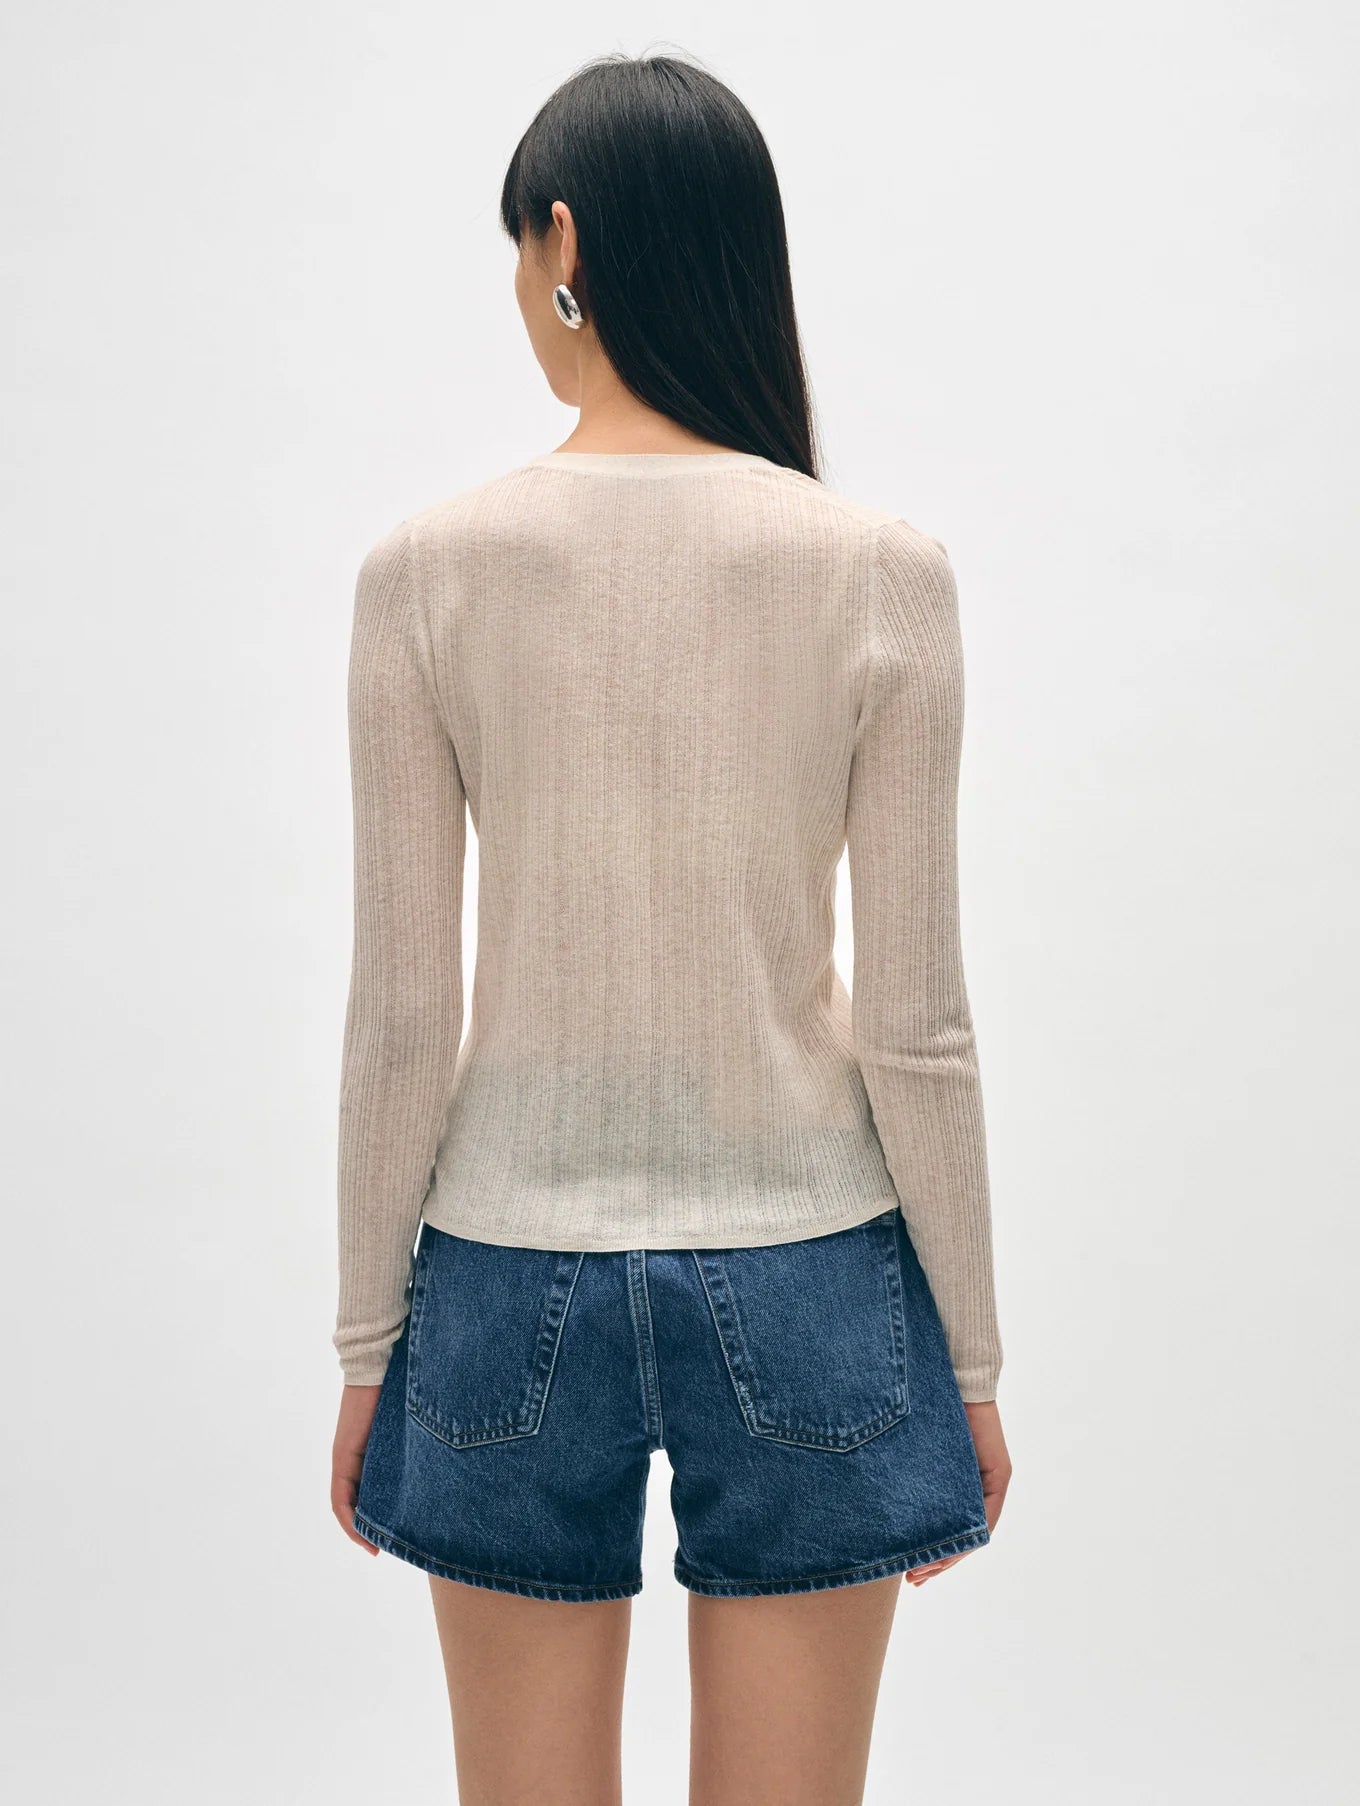 Back view of White and Warren's Linen Gauze Ribbed V Neck Cardigan in the color Calico